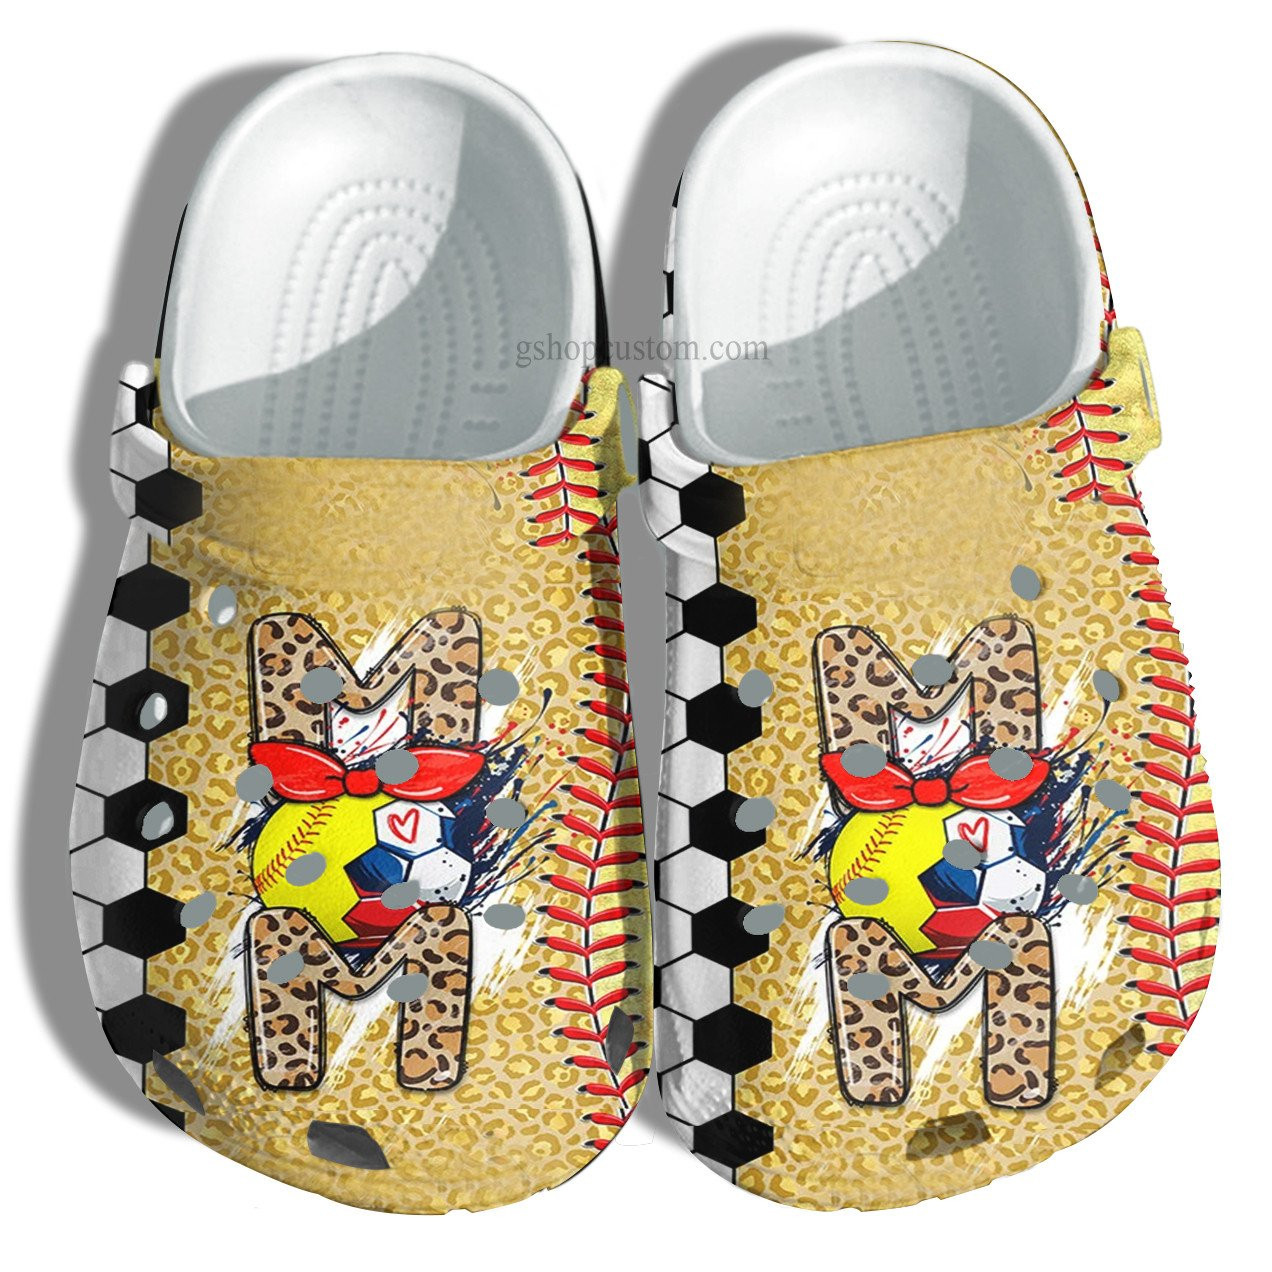 Soccor Mom Twinkle Croc Shoes Leopar Style - Football Mom Leopard Crocs Shoes Gift Birthday Mother